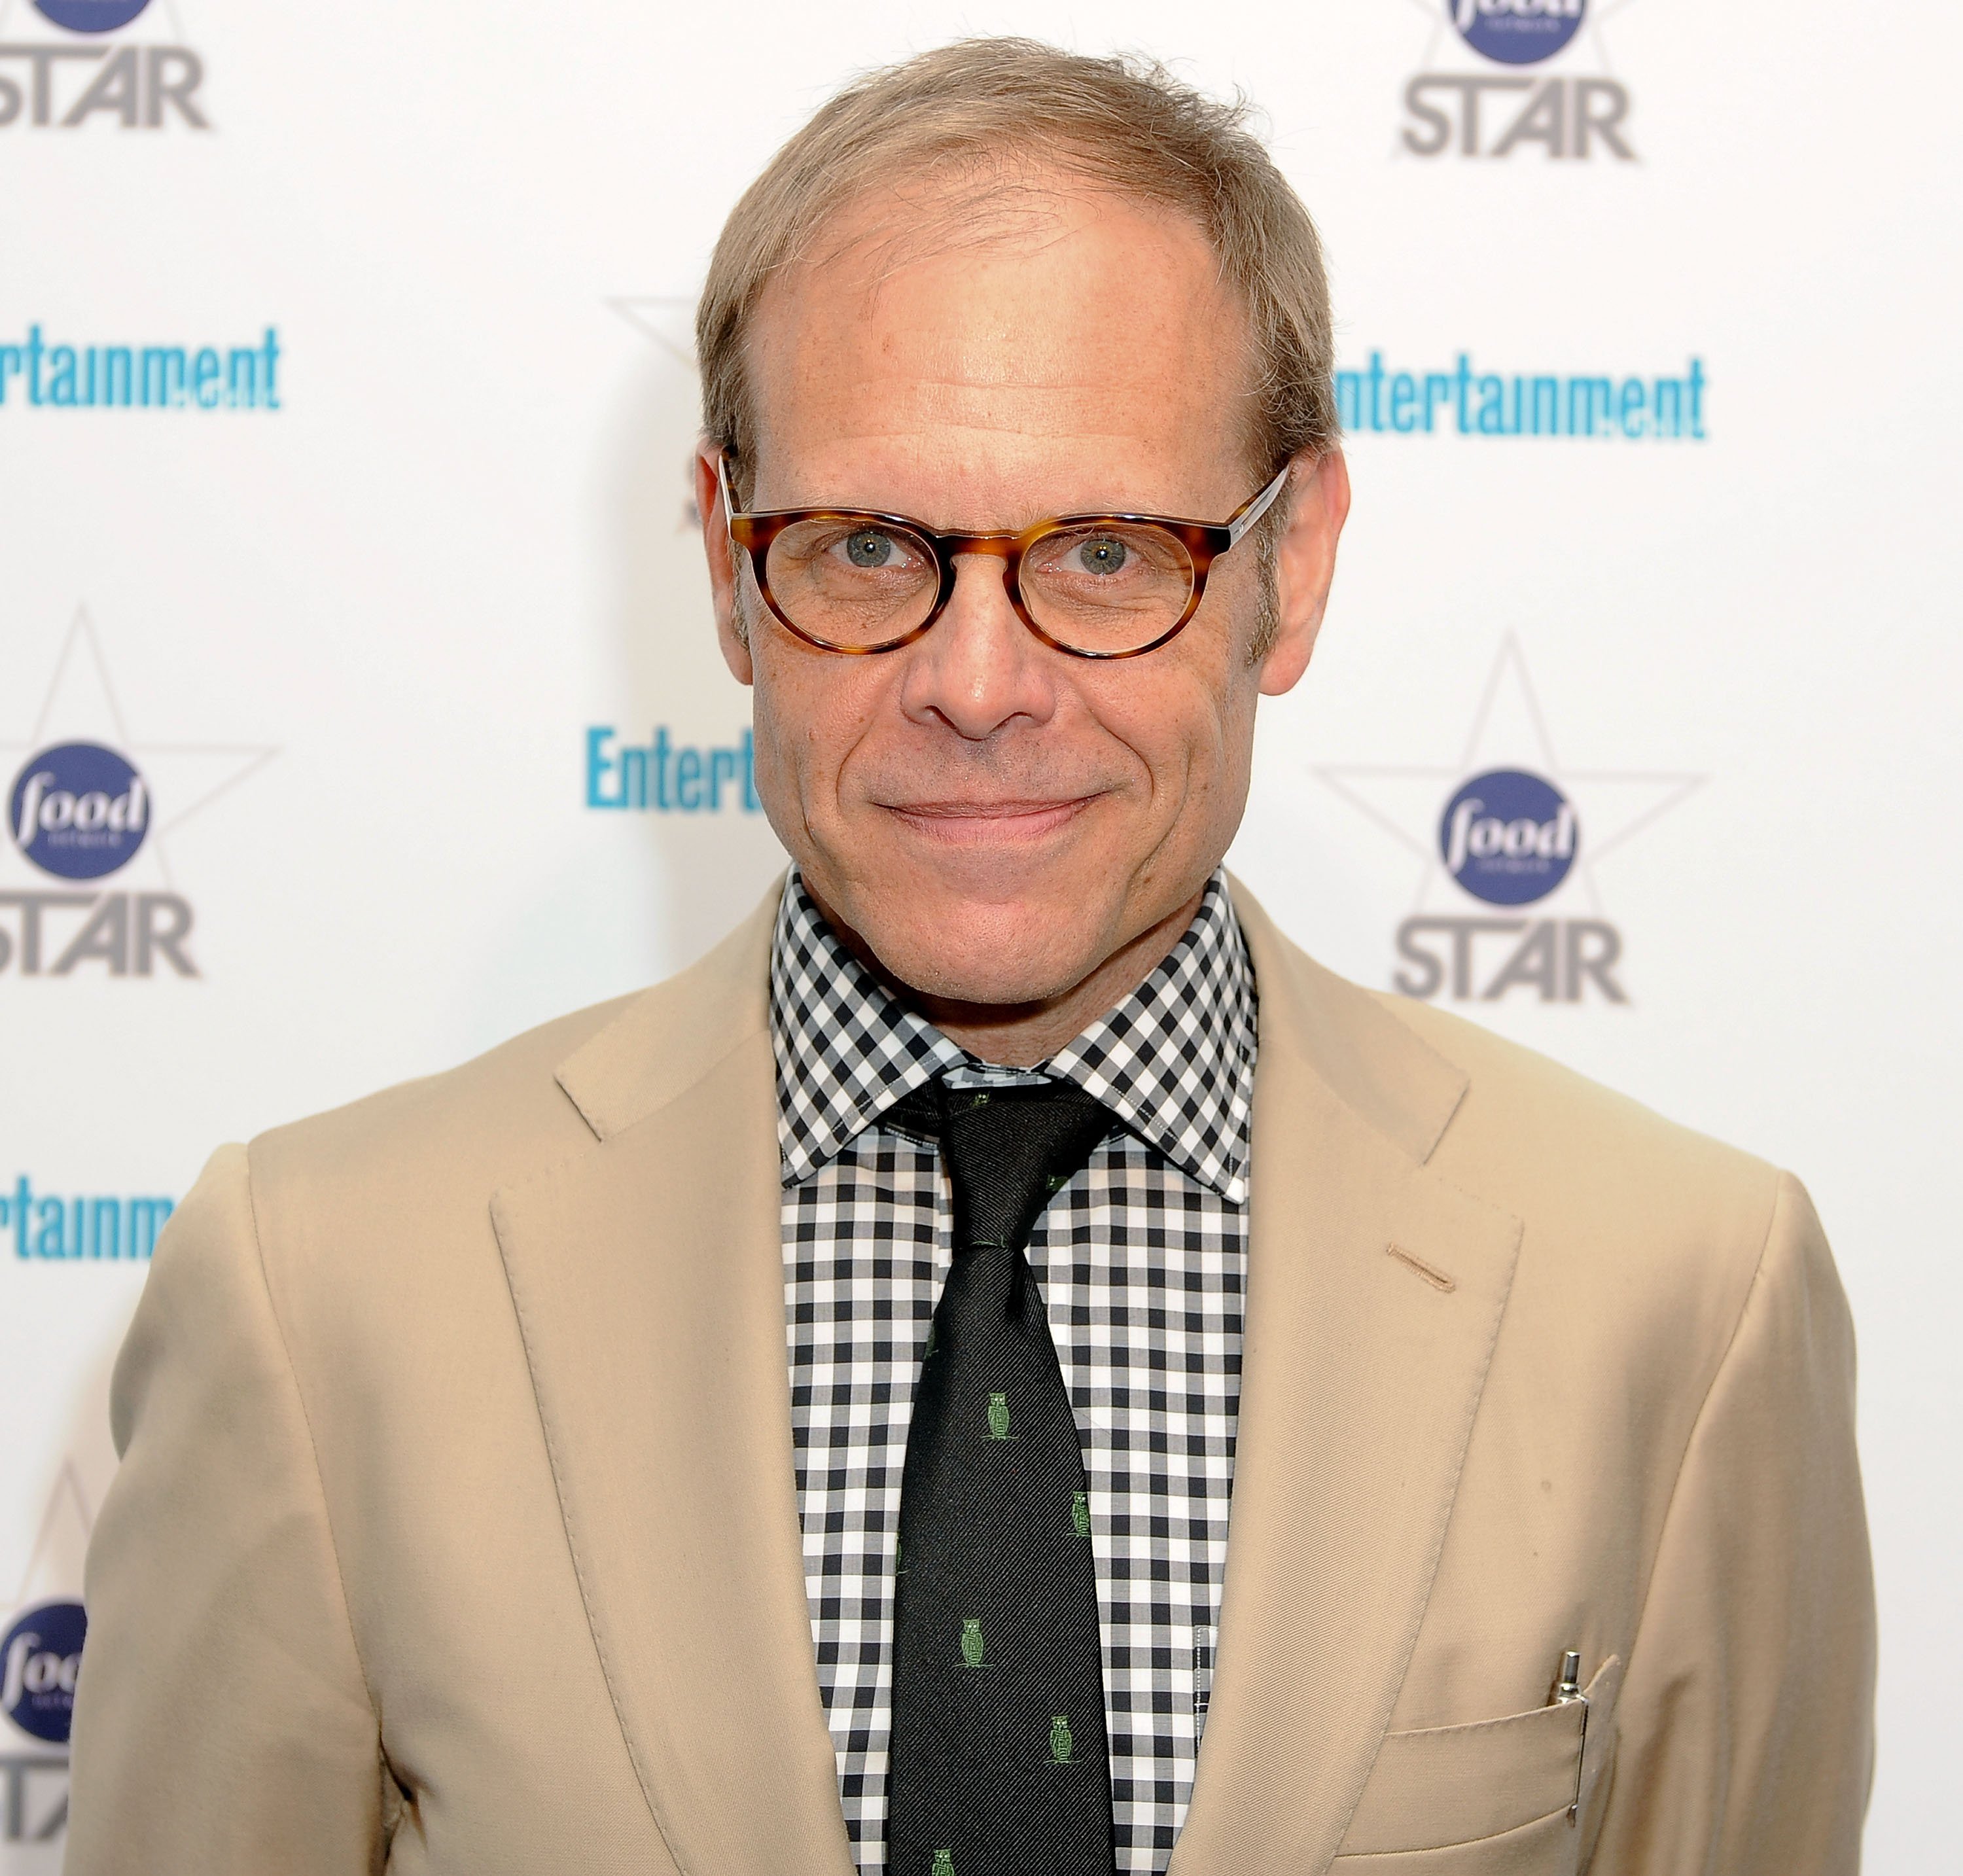 Alton Brown poses for a photo in a light-colored jacket.